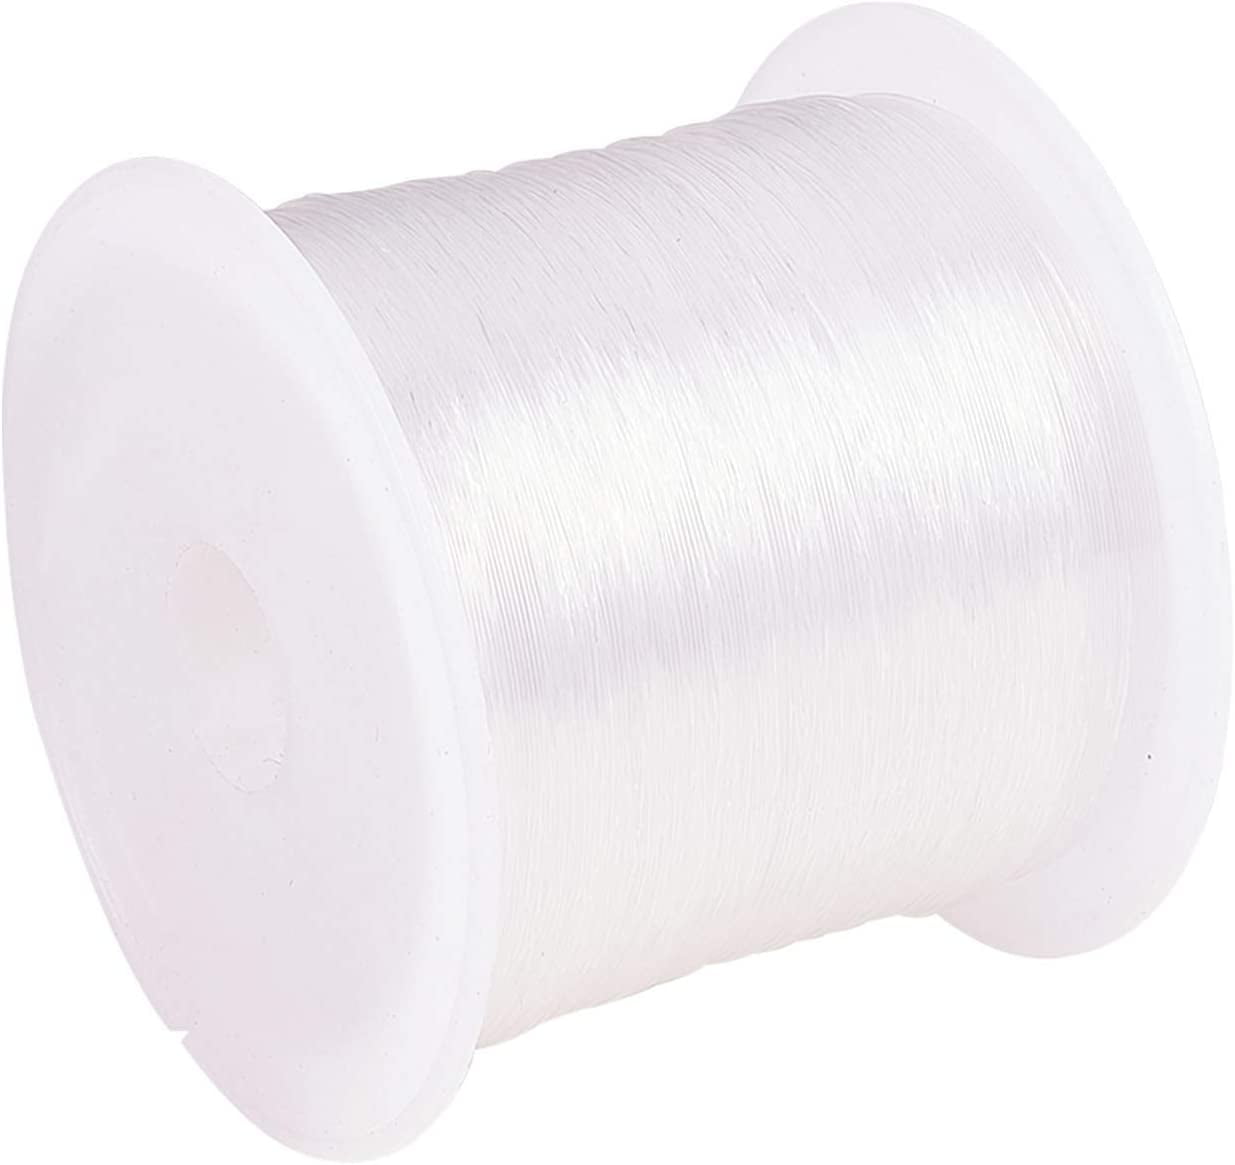 Whale Stretchy String for Bracelets, 3 Rolls Clear Elastic White